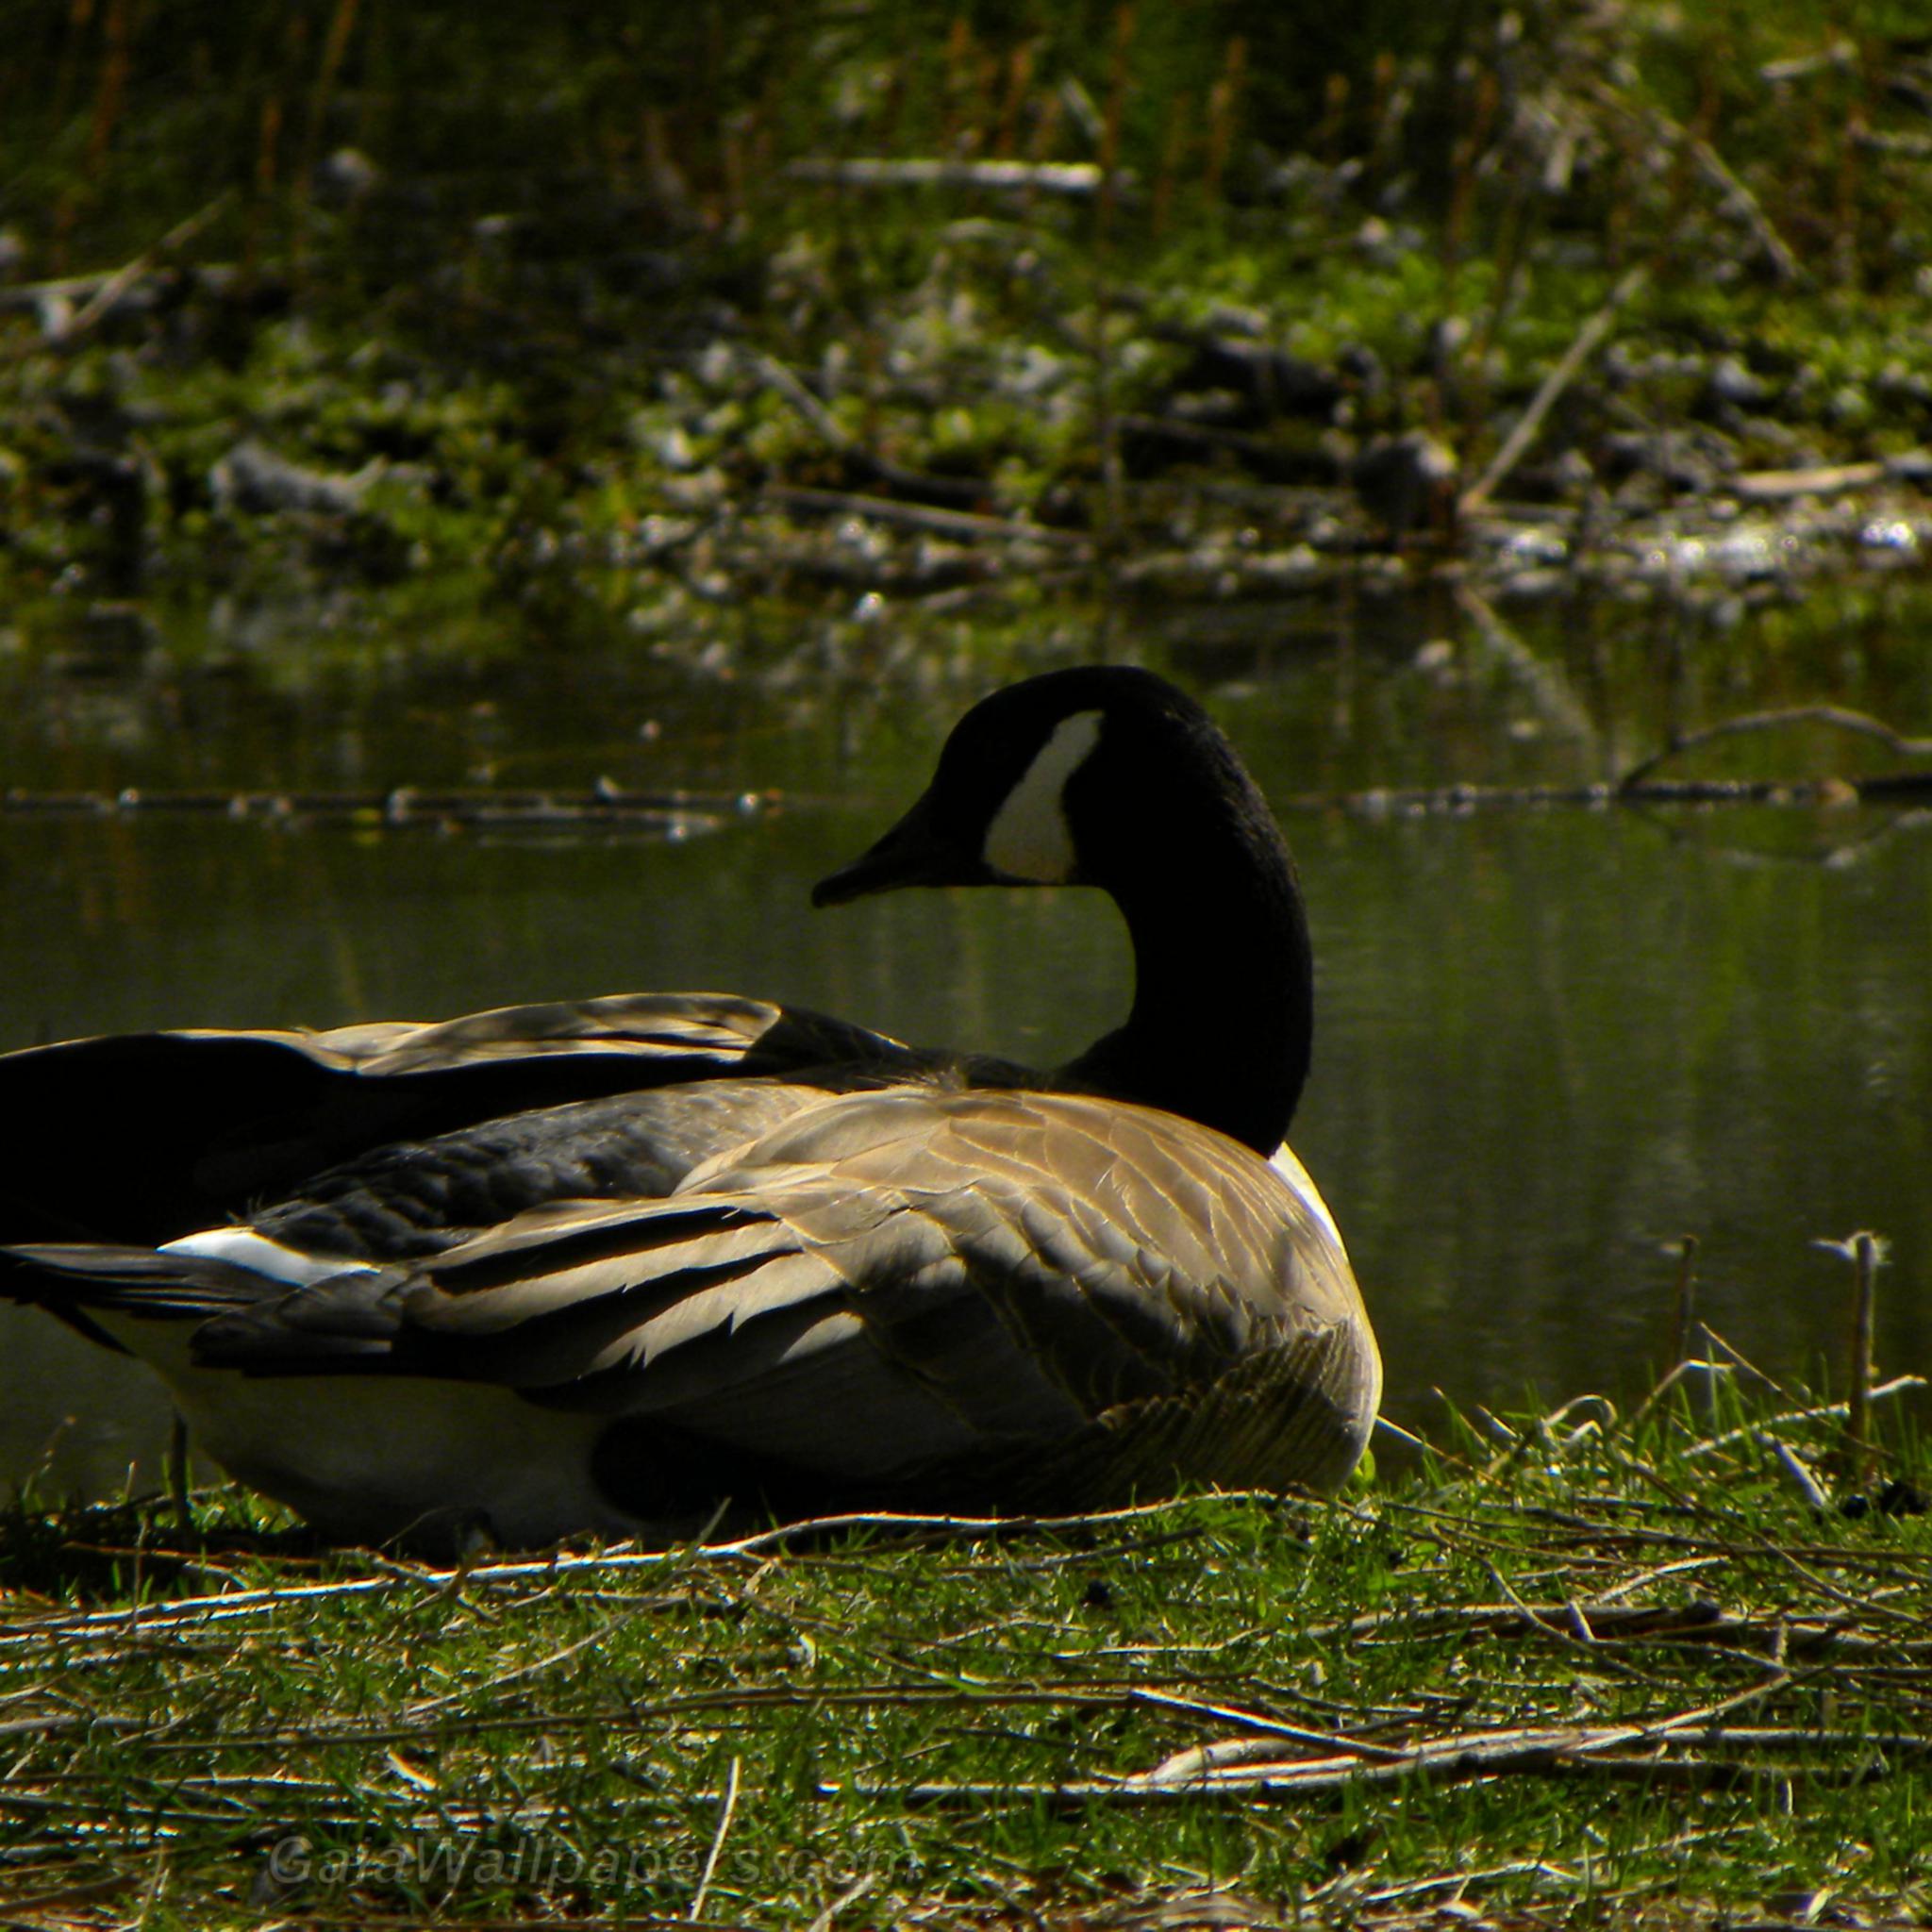 Canada Goose resting near a pond - Free desktop wallpapers